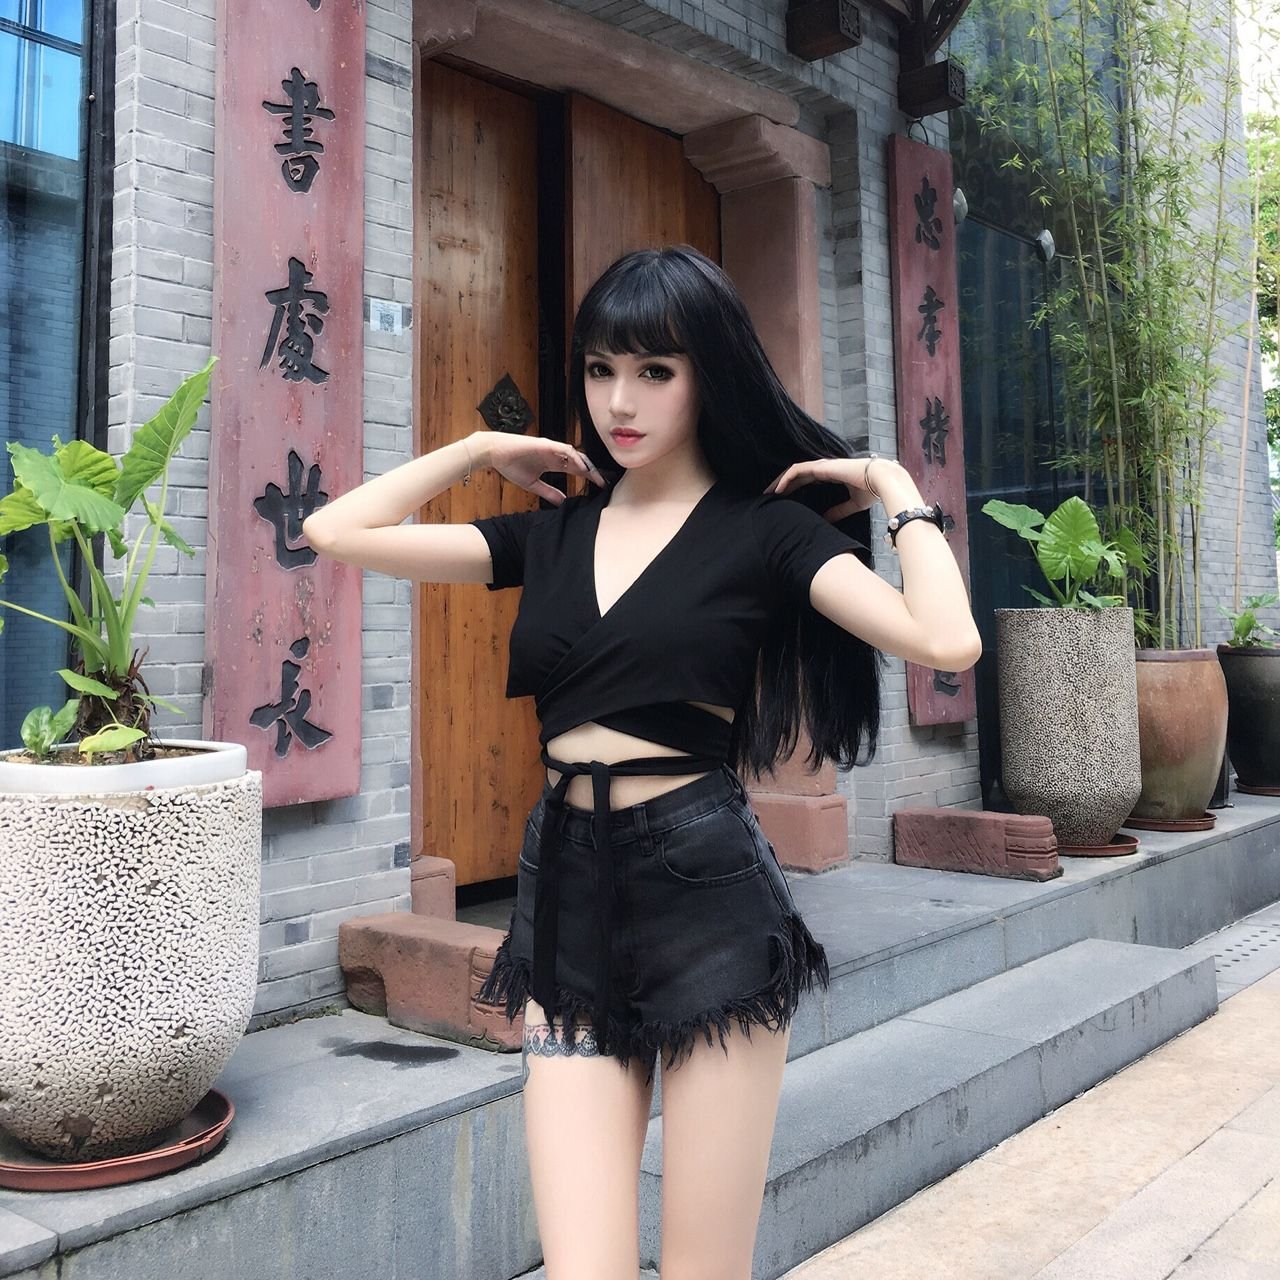 This chinese model queen